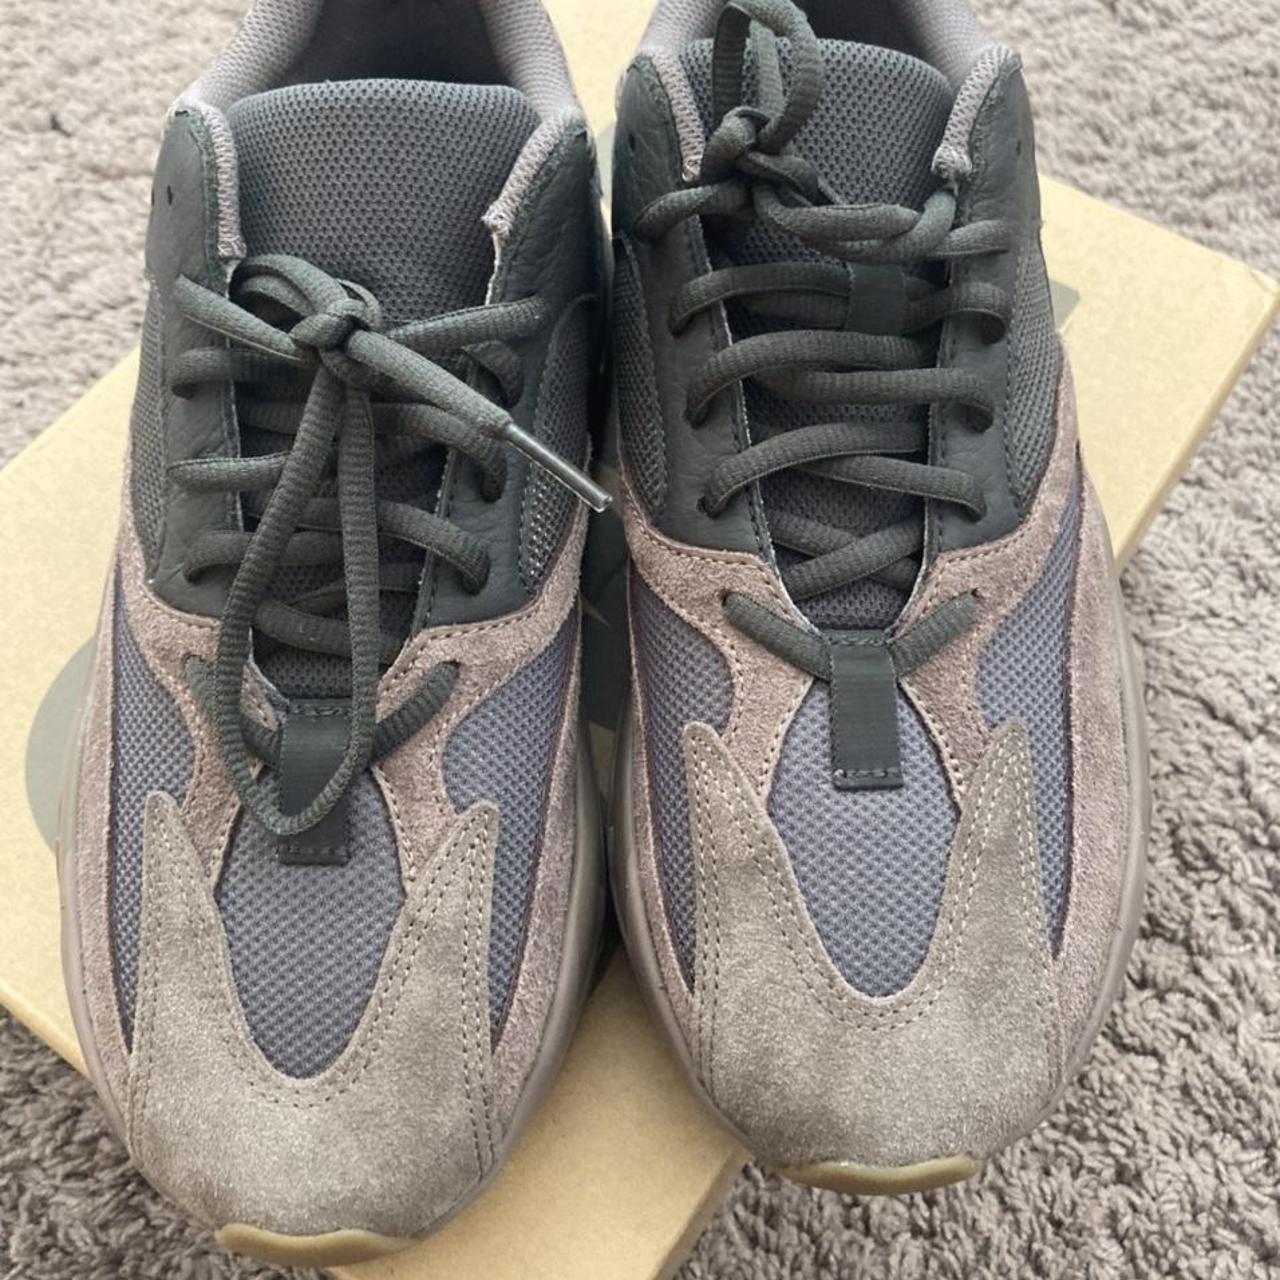 YEEZY BOOST 700 MADE BY ADIDAS MAUVE COLORWAY- no... - Depop